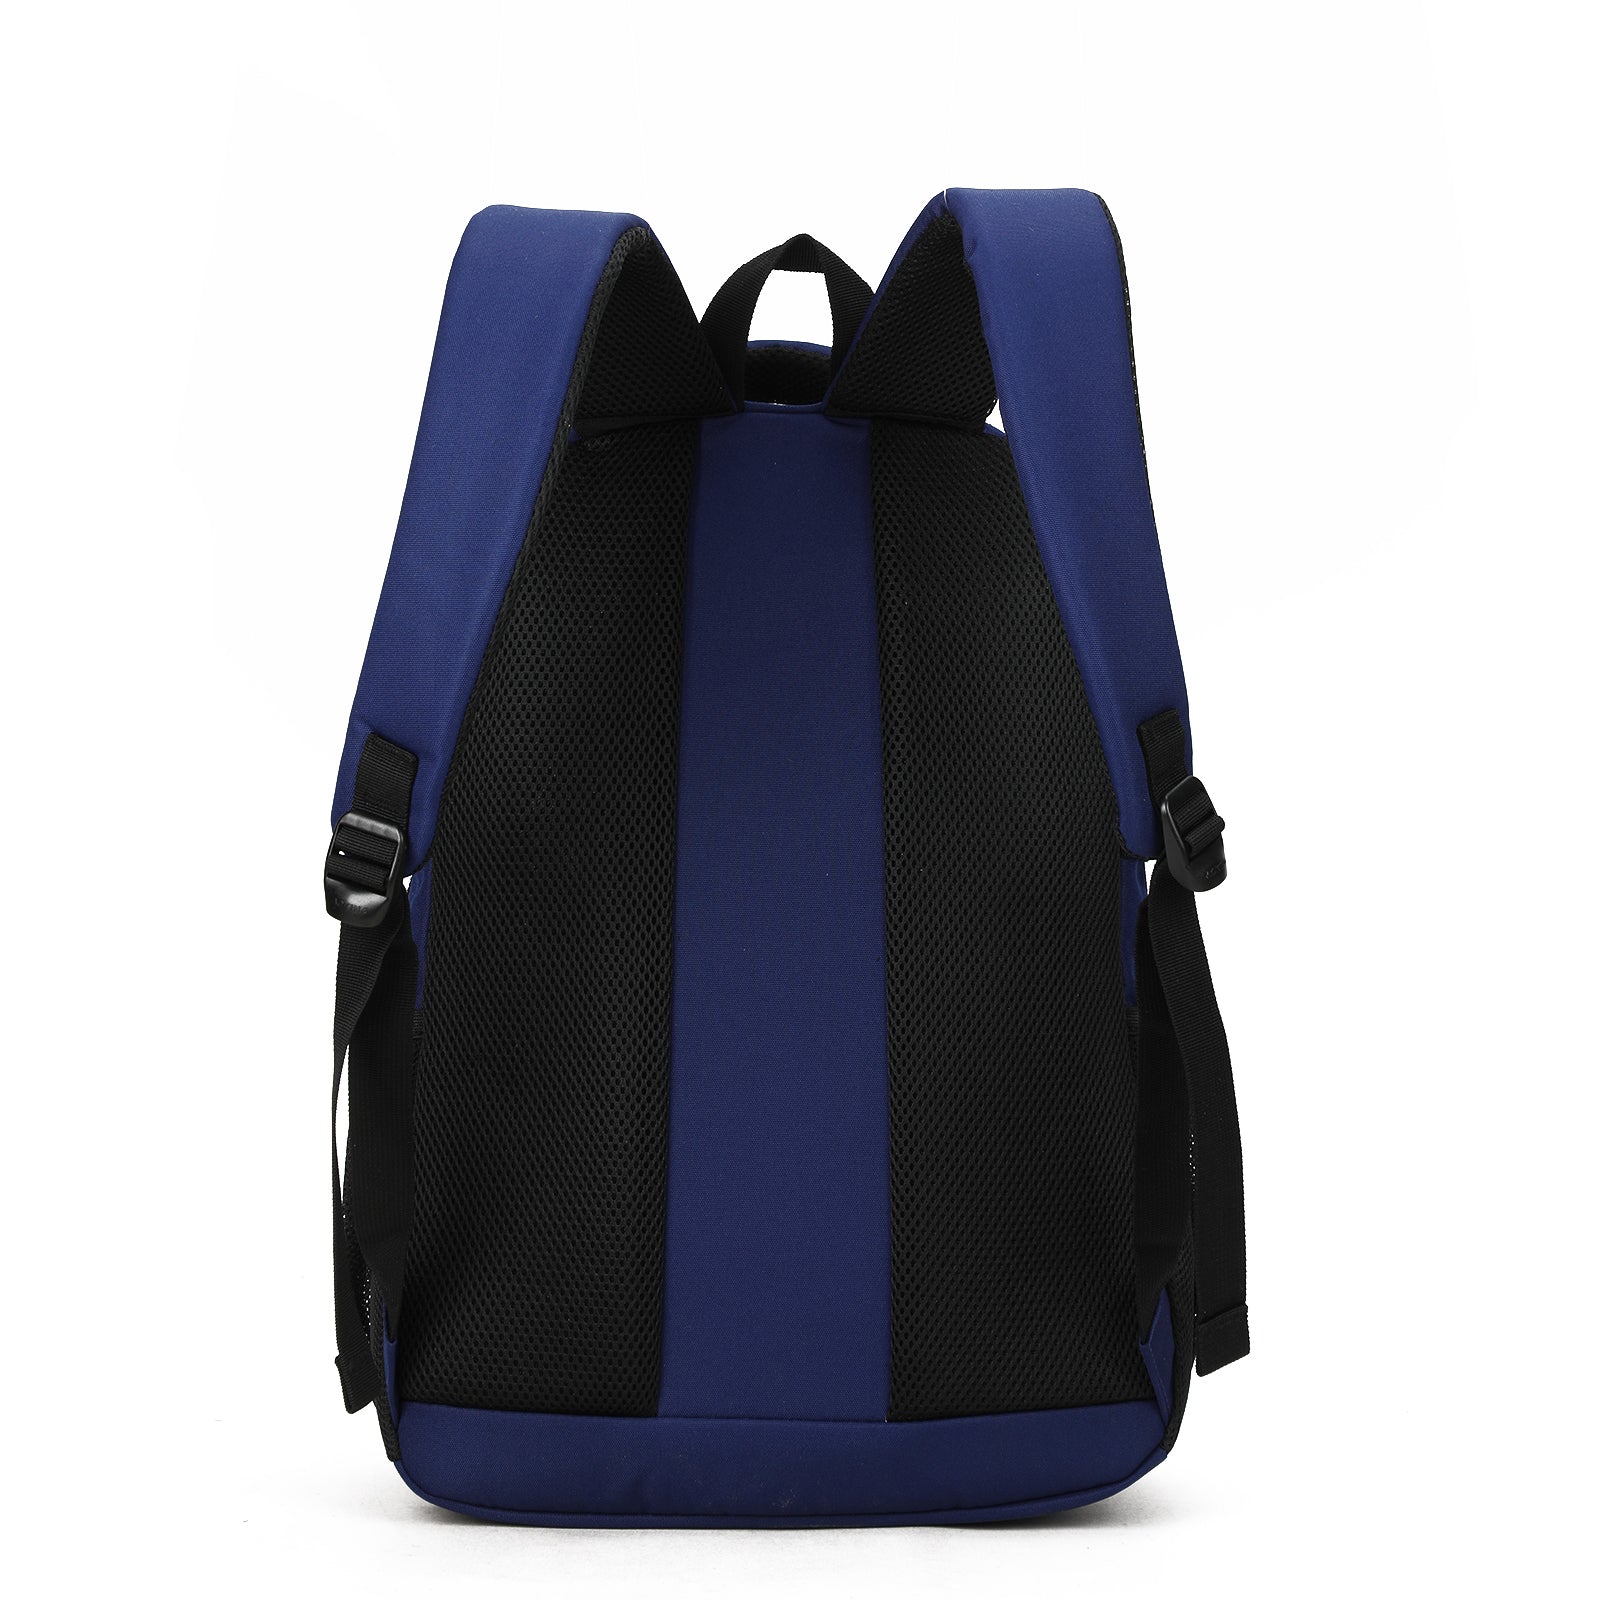 Aoking Travel Backpack XN2610 Navy